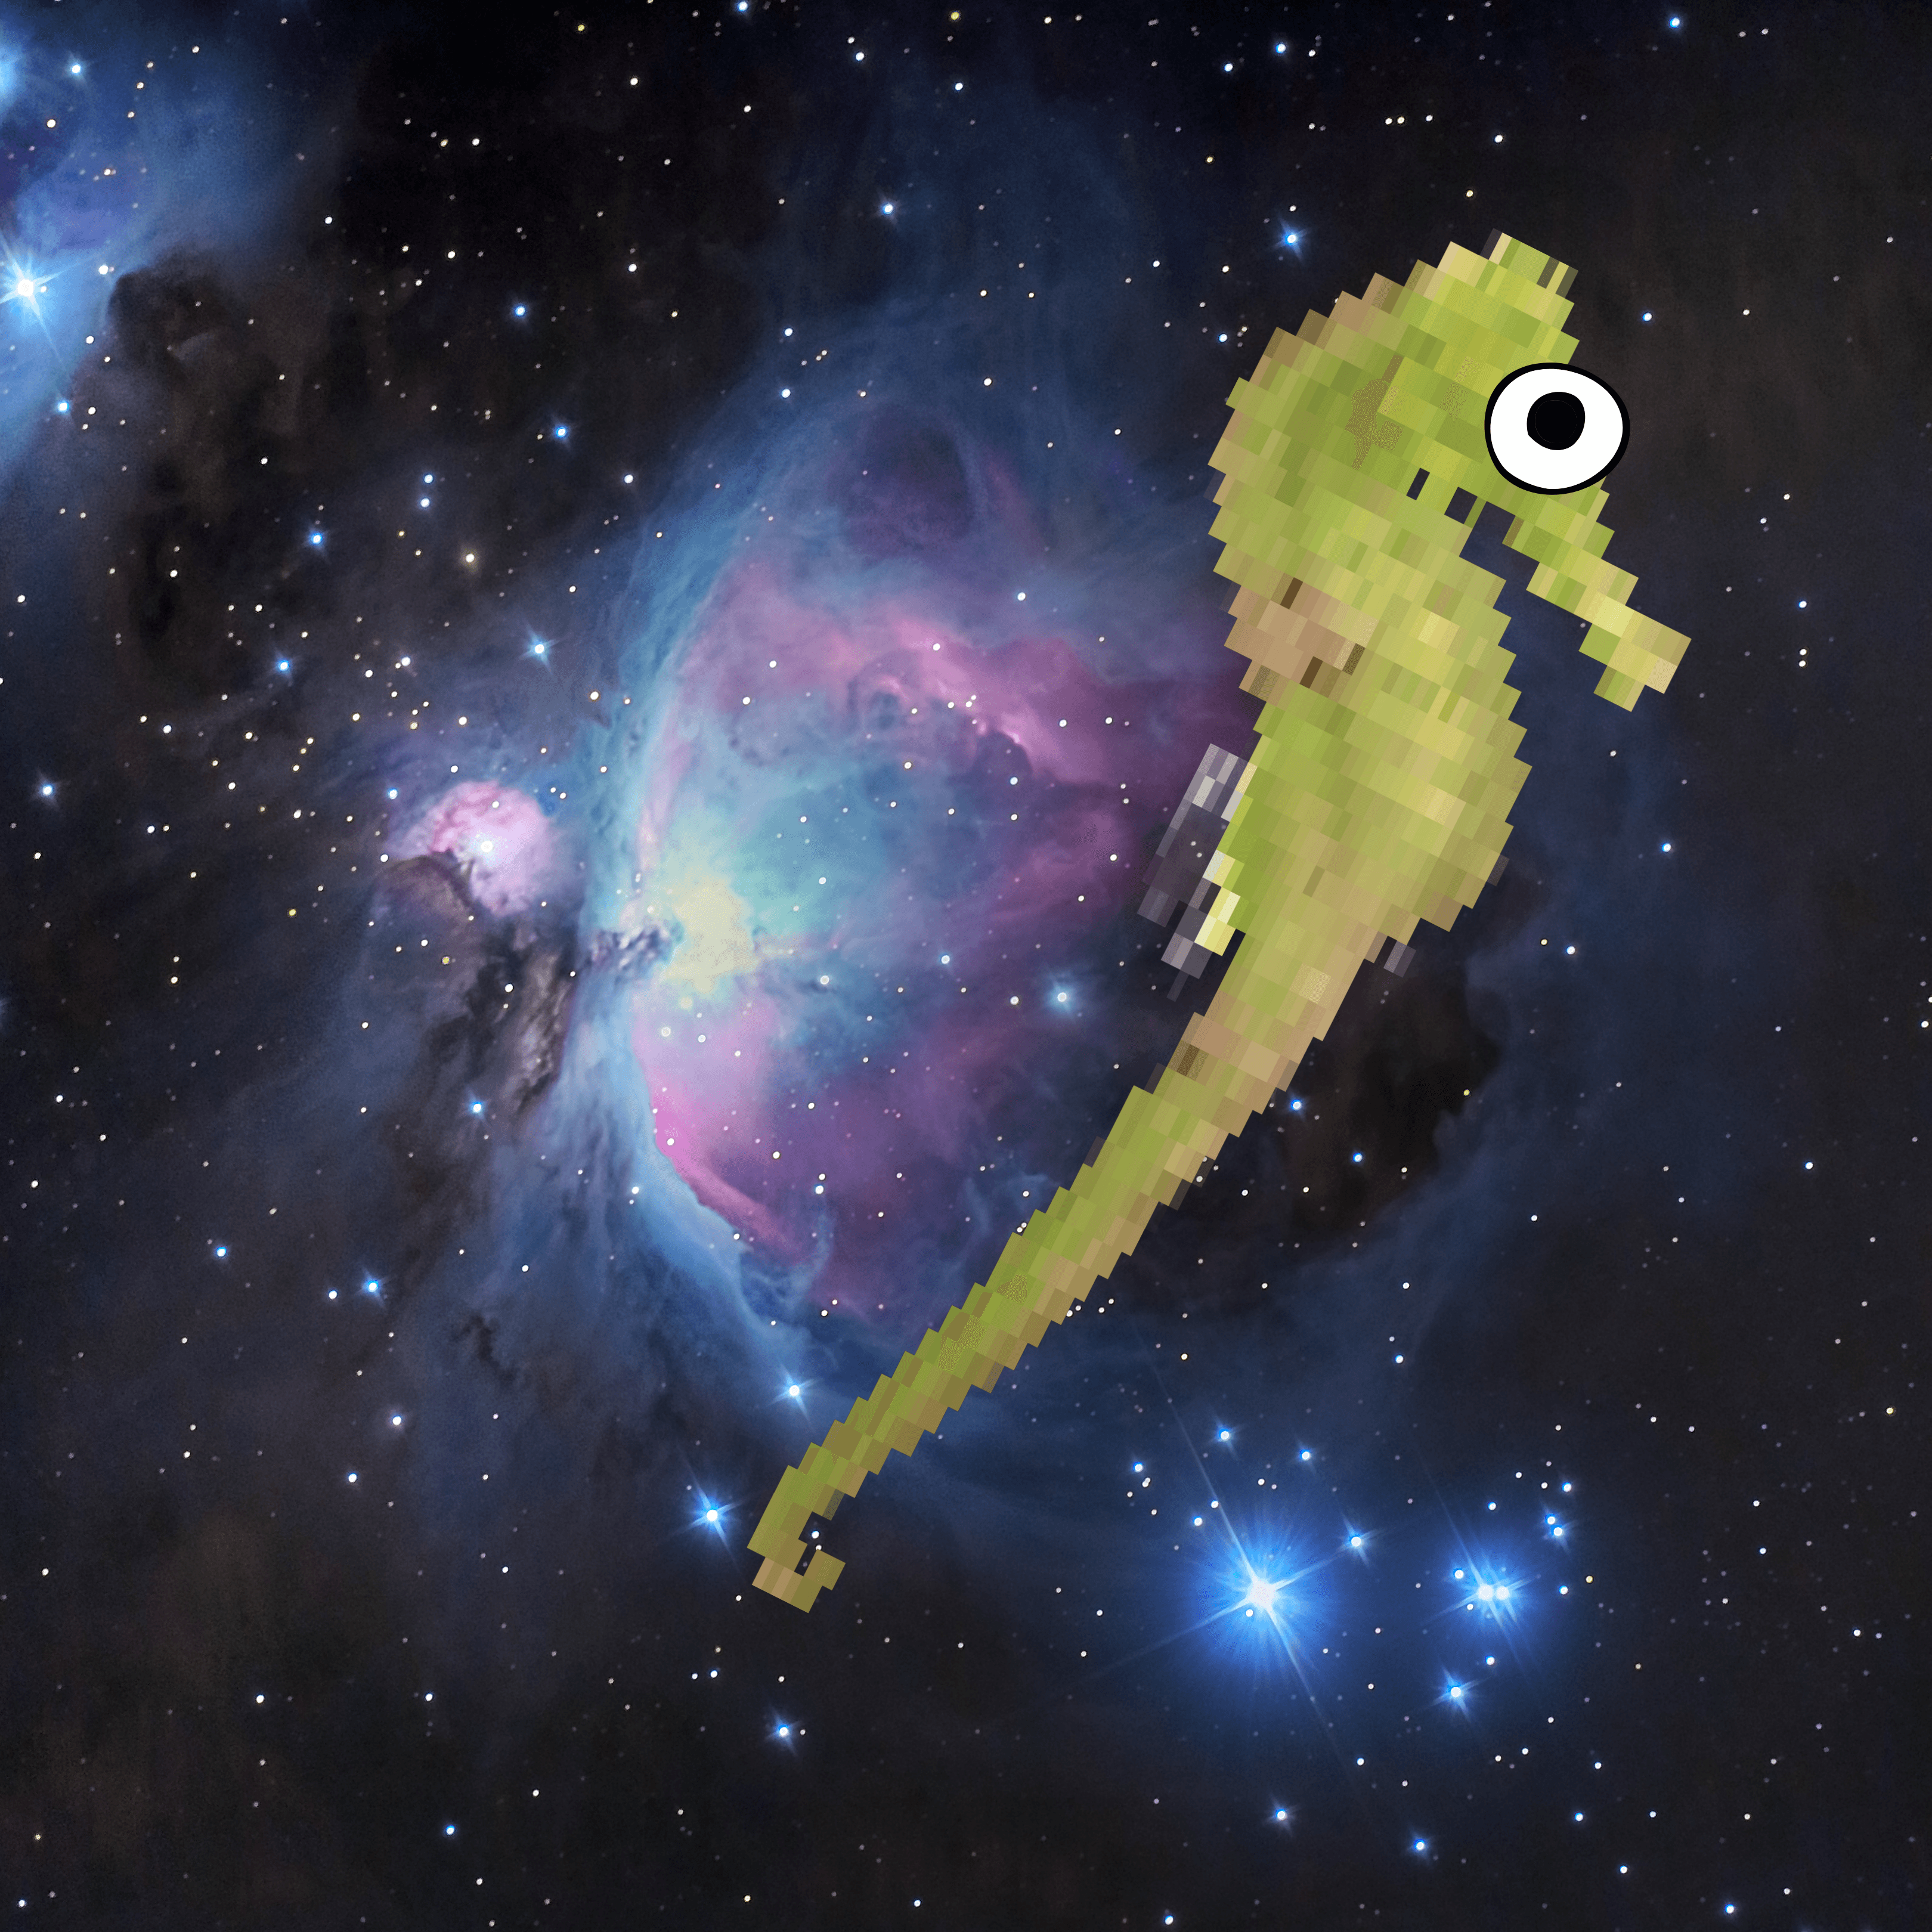 Seahorse in Space XIII